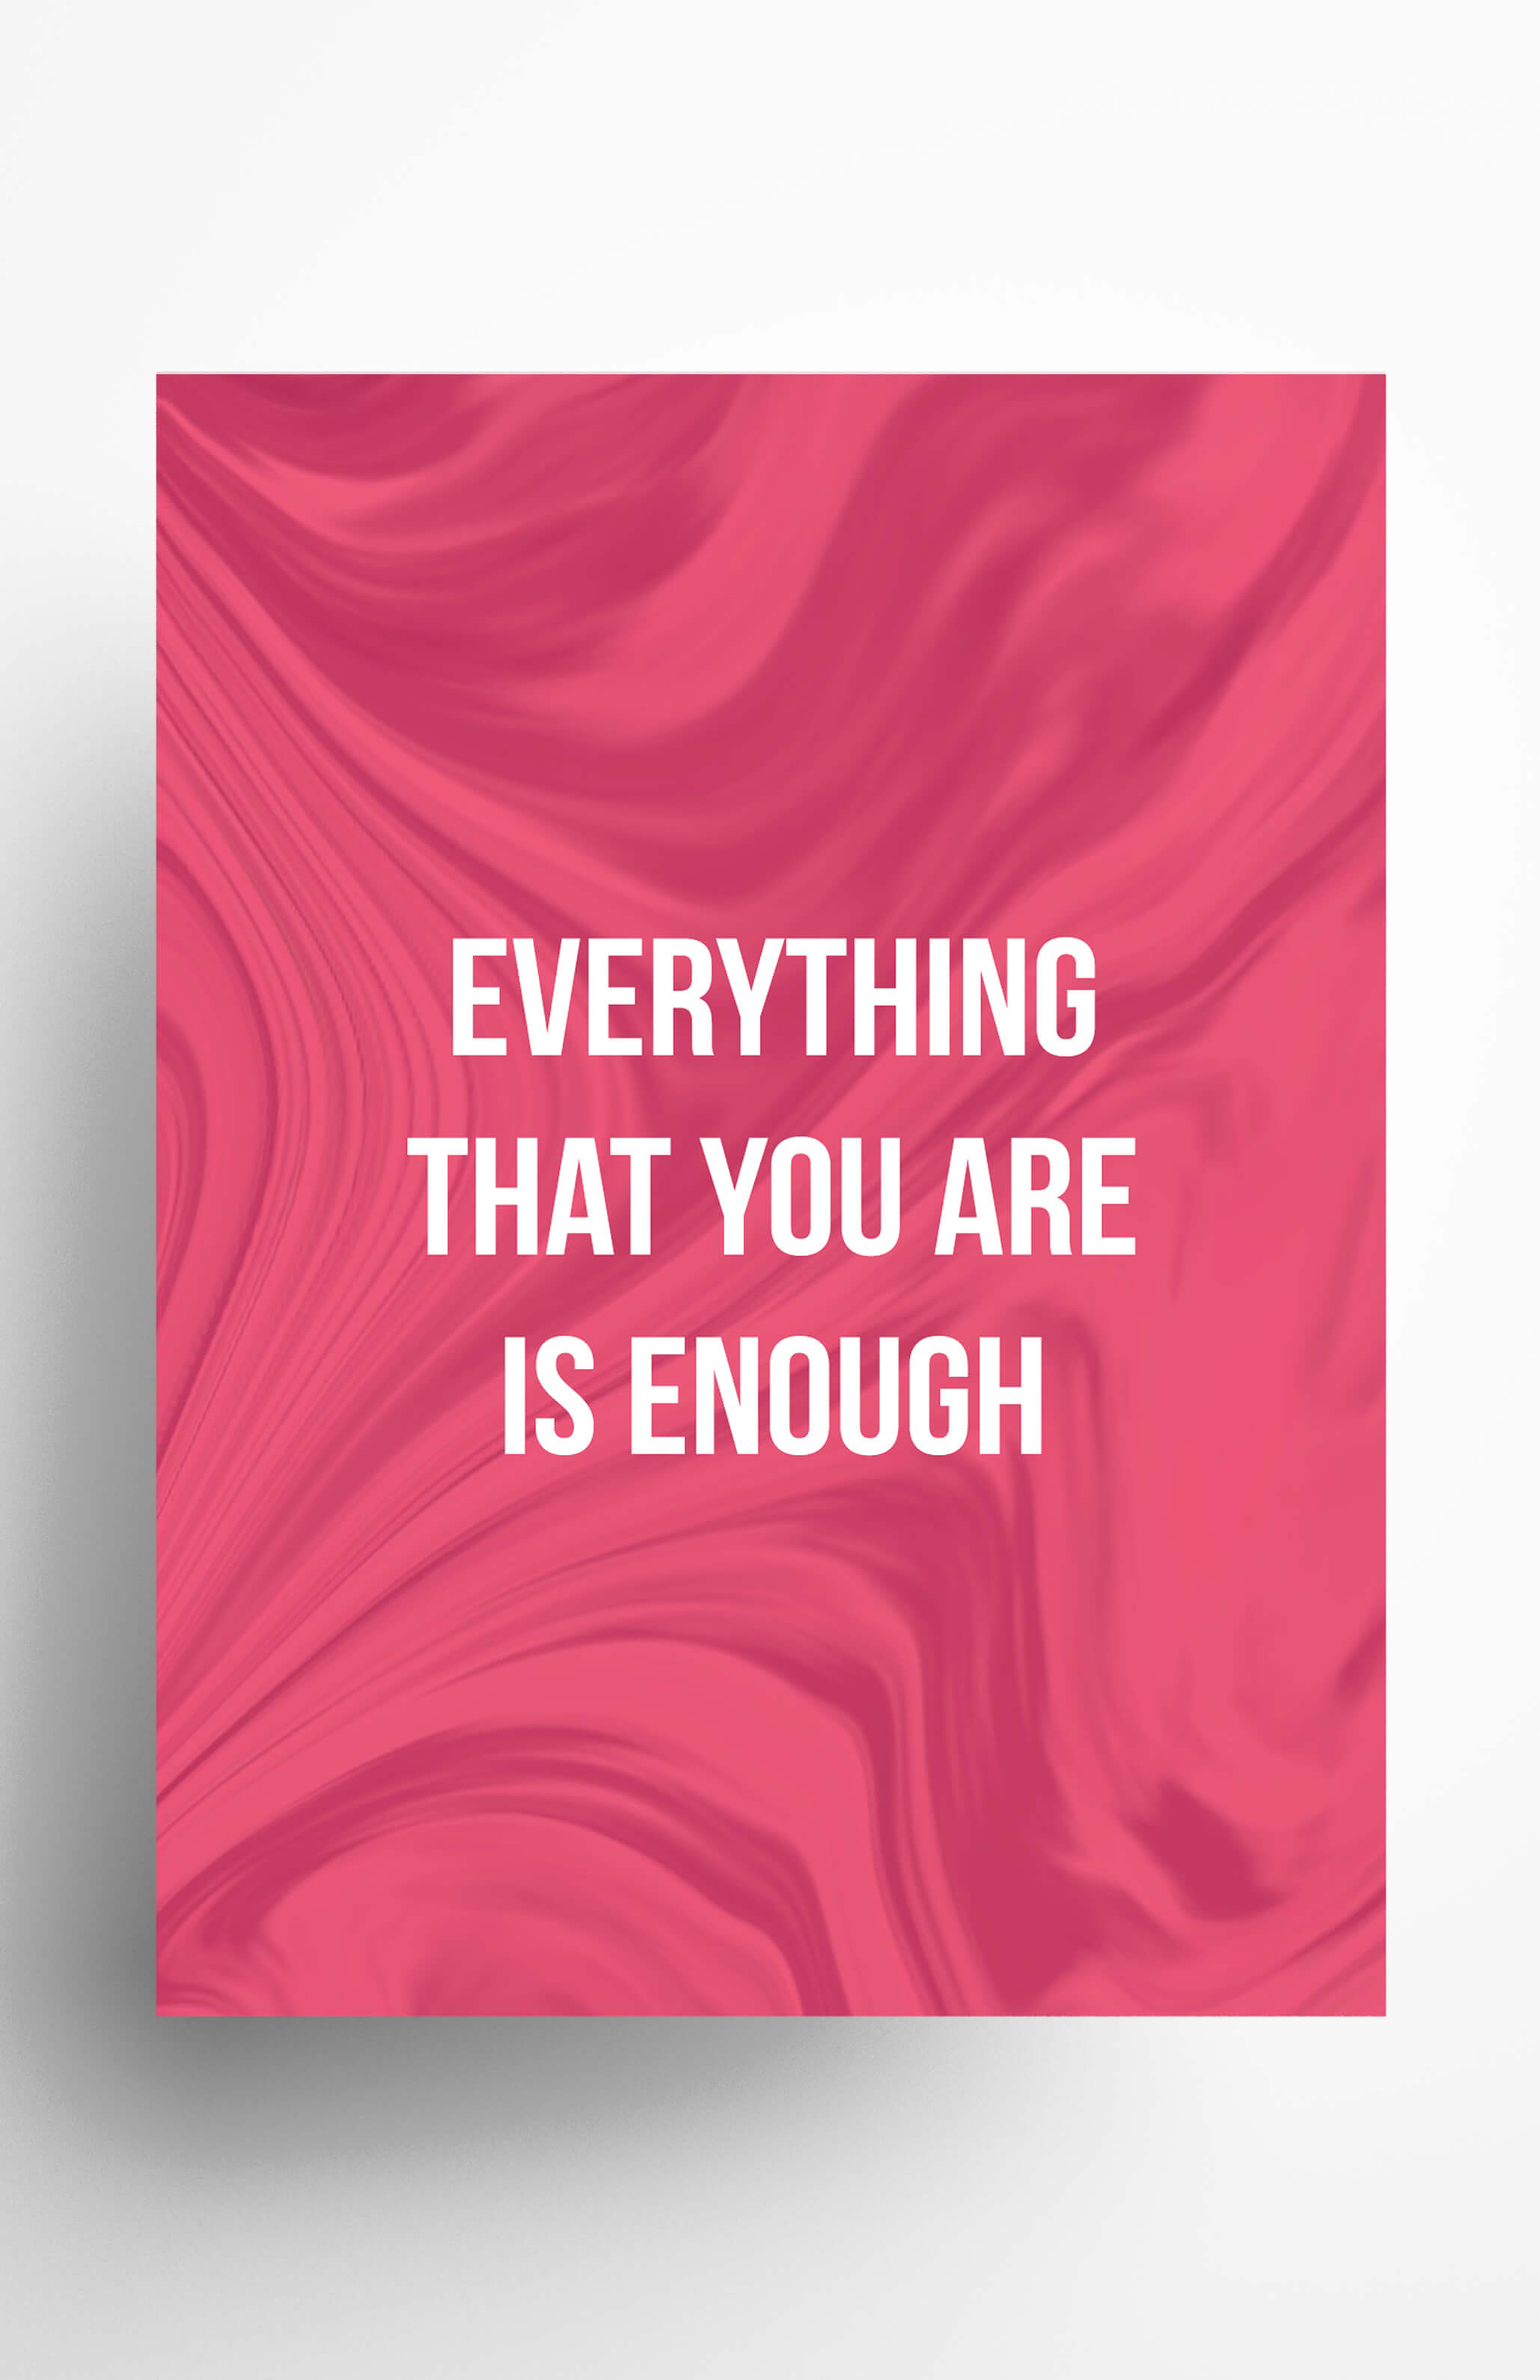 V3 Apparel womens Everything that you are is enough, Motivational posters, mens inspirational wall artwork and empowering poster quote designs for office, home gym, school, kitchen and living room.